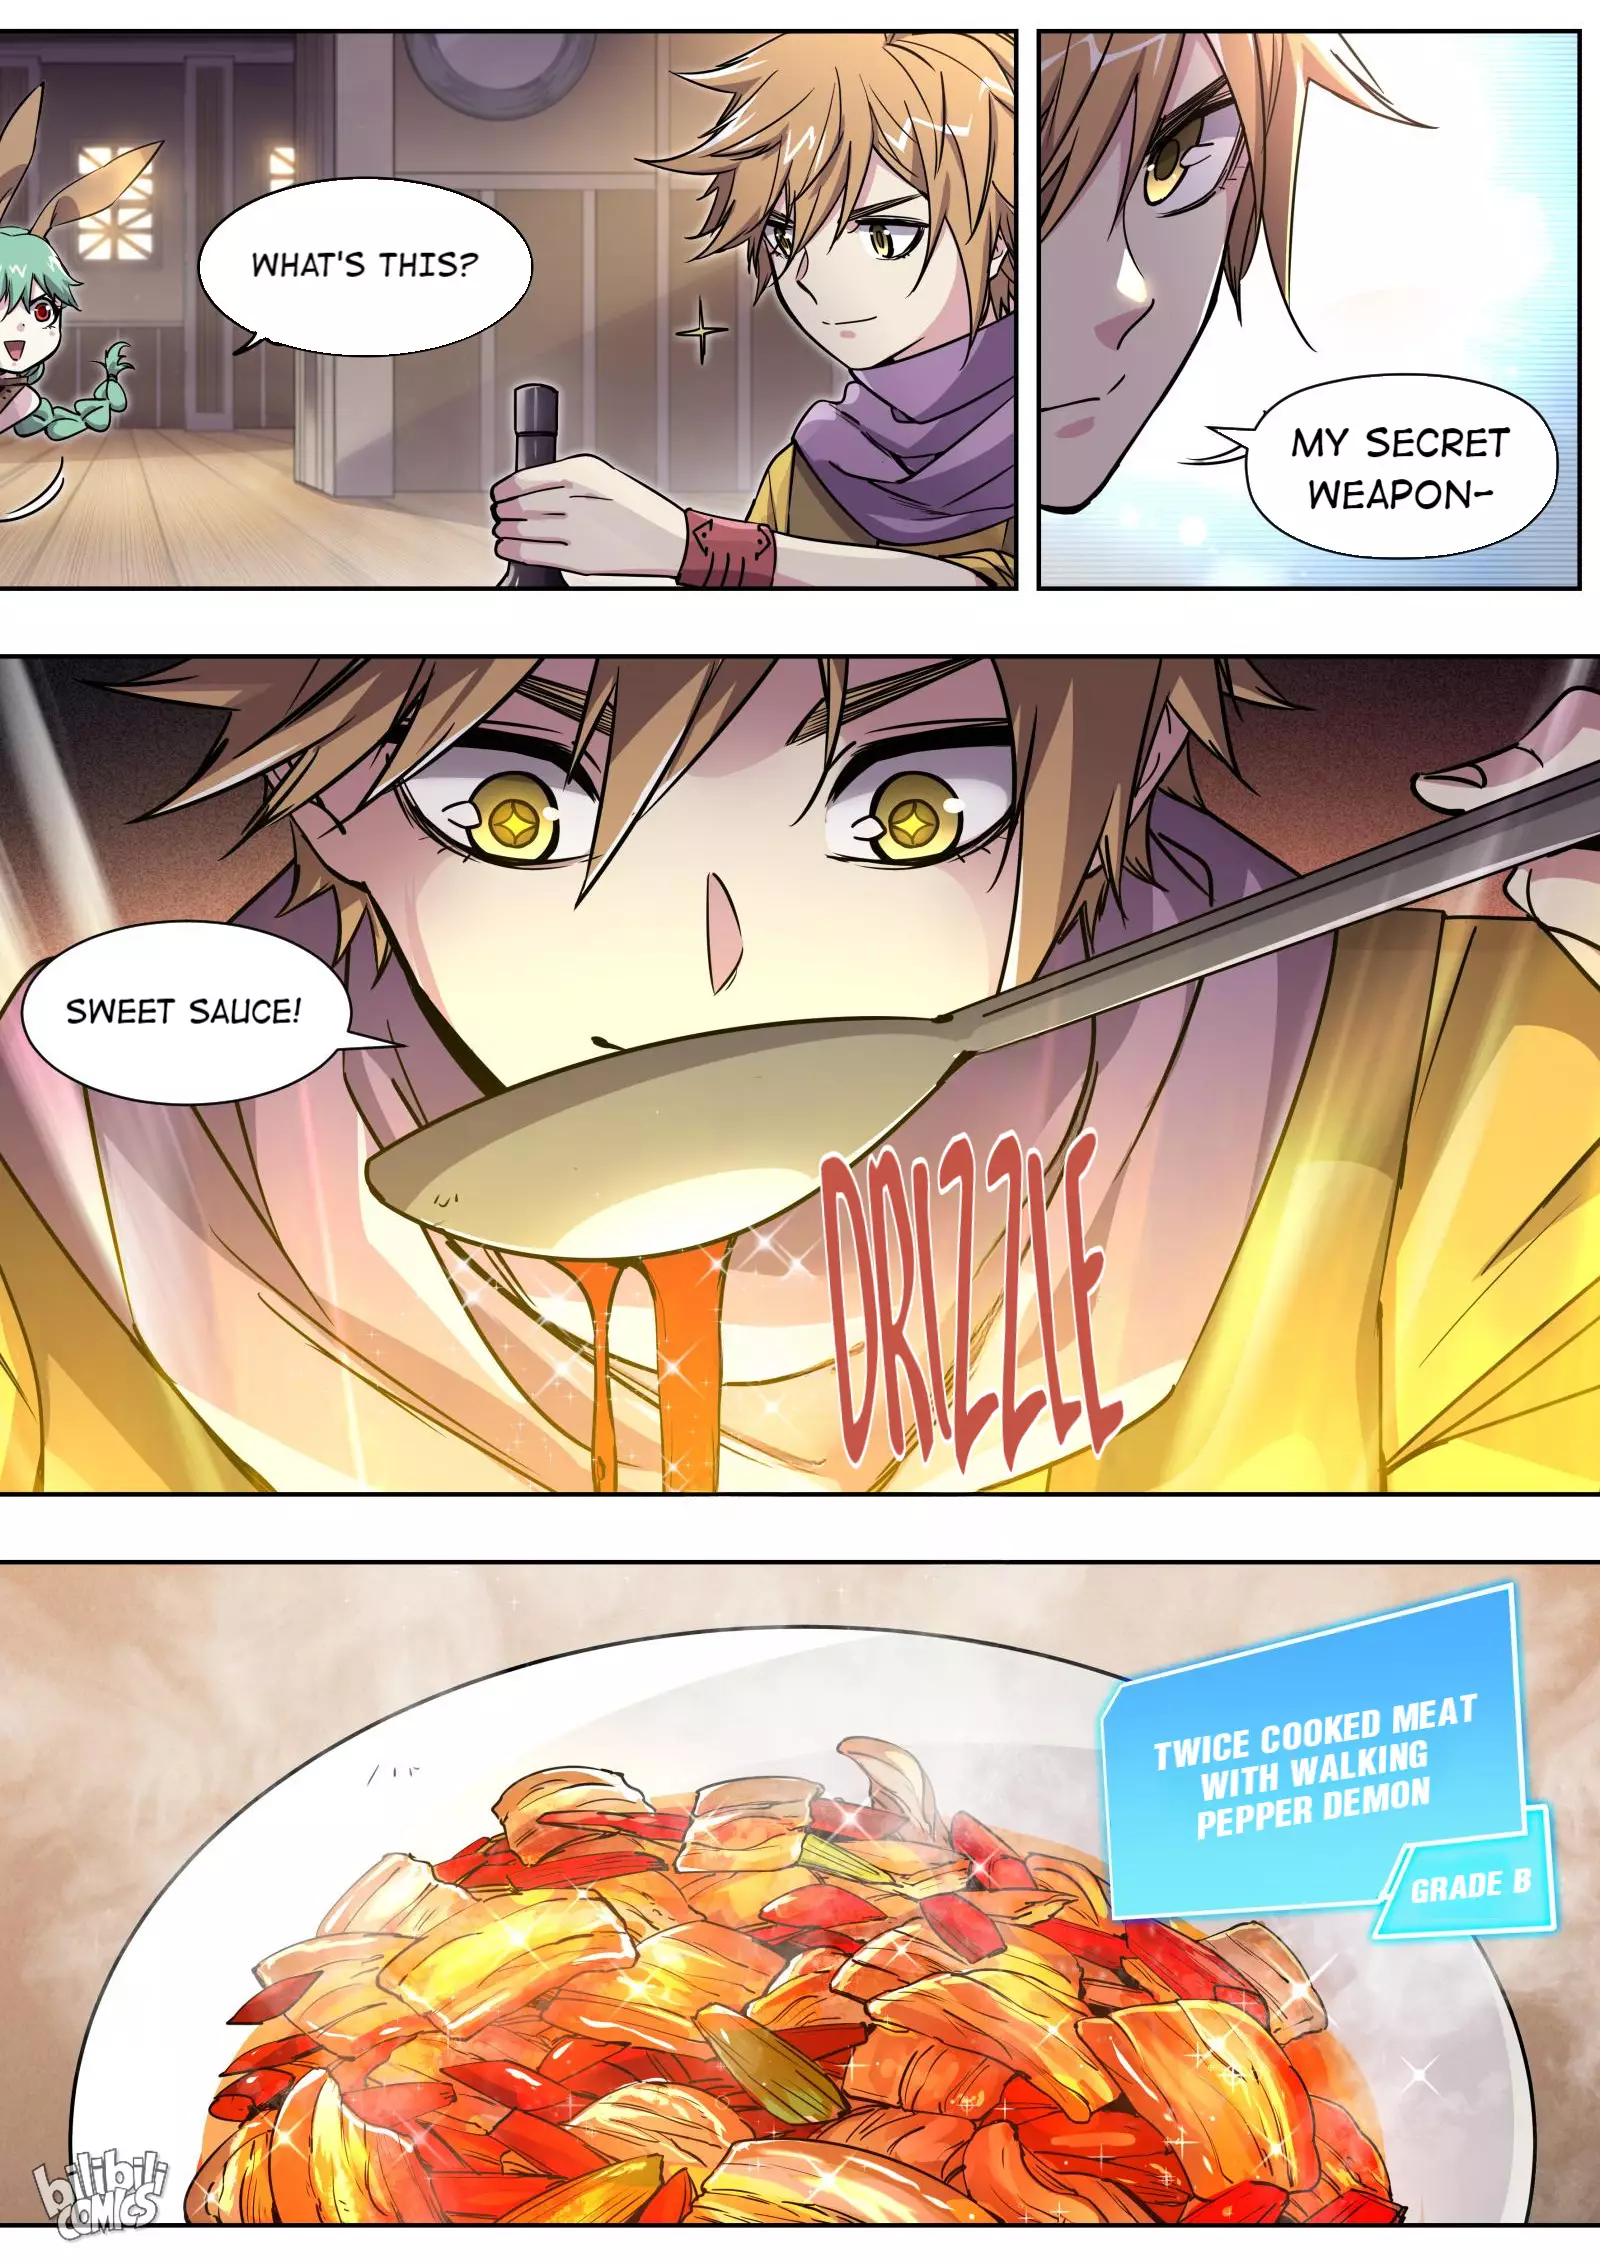 The Sichuan Cuisine Chef And His Valiant Babes Of Another World - 6 page 14-801bb913